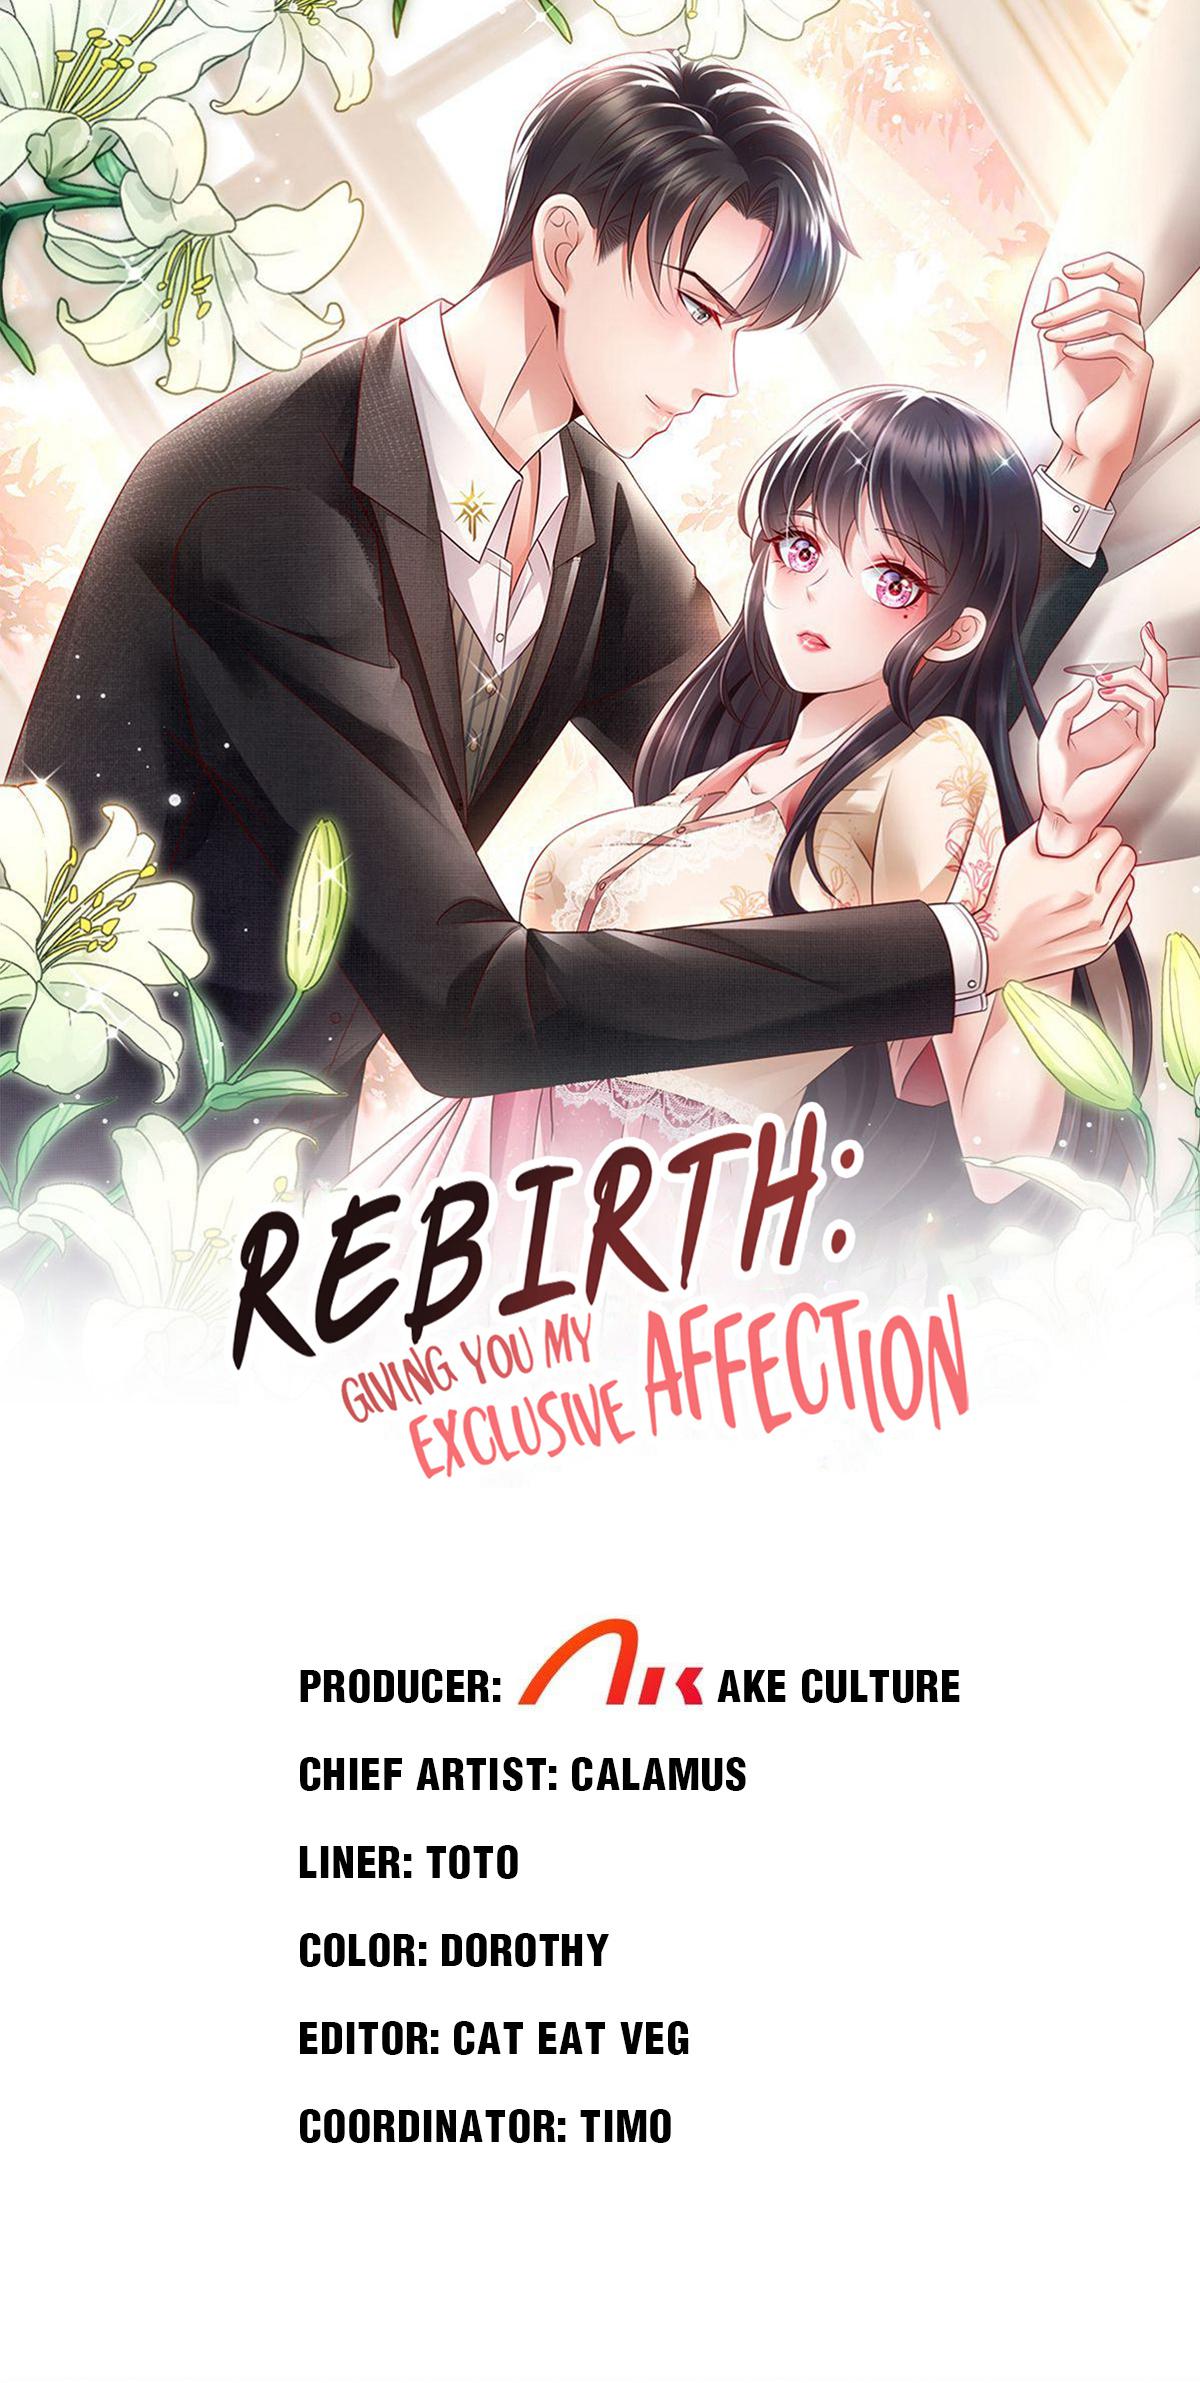 Rebirth: Giving You My Exclusive Affection 121